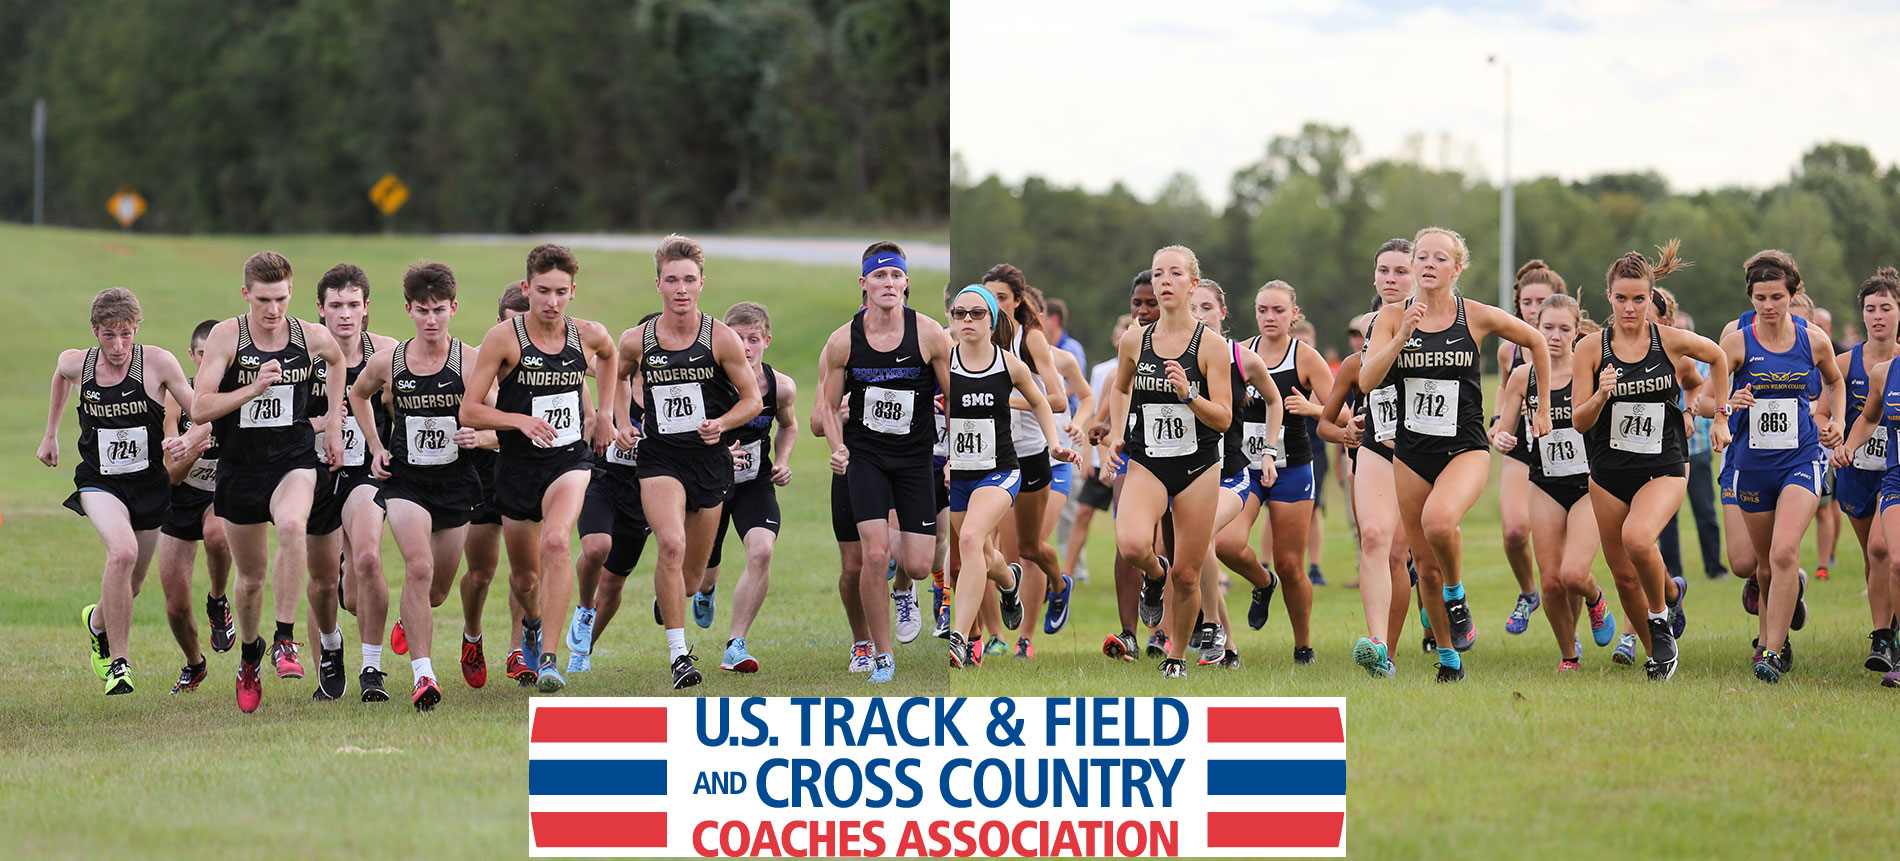 Women’s Cross Country is Third in First USTFCCCA Southeast Region Poll; Men Ranked Fourth